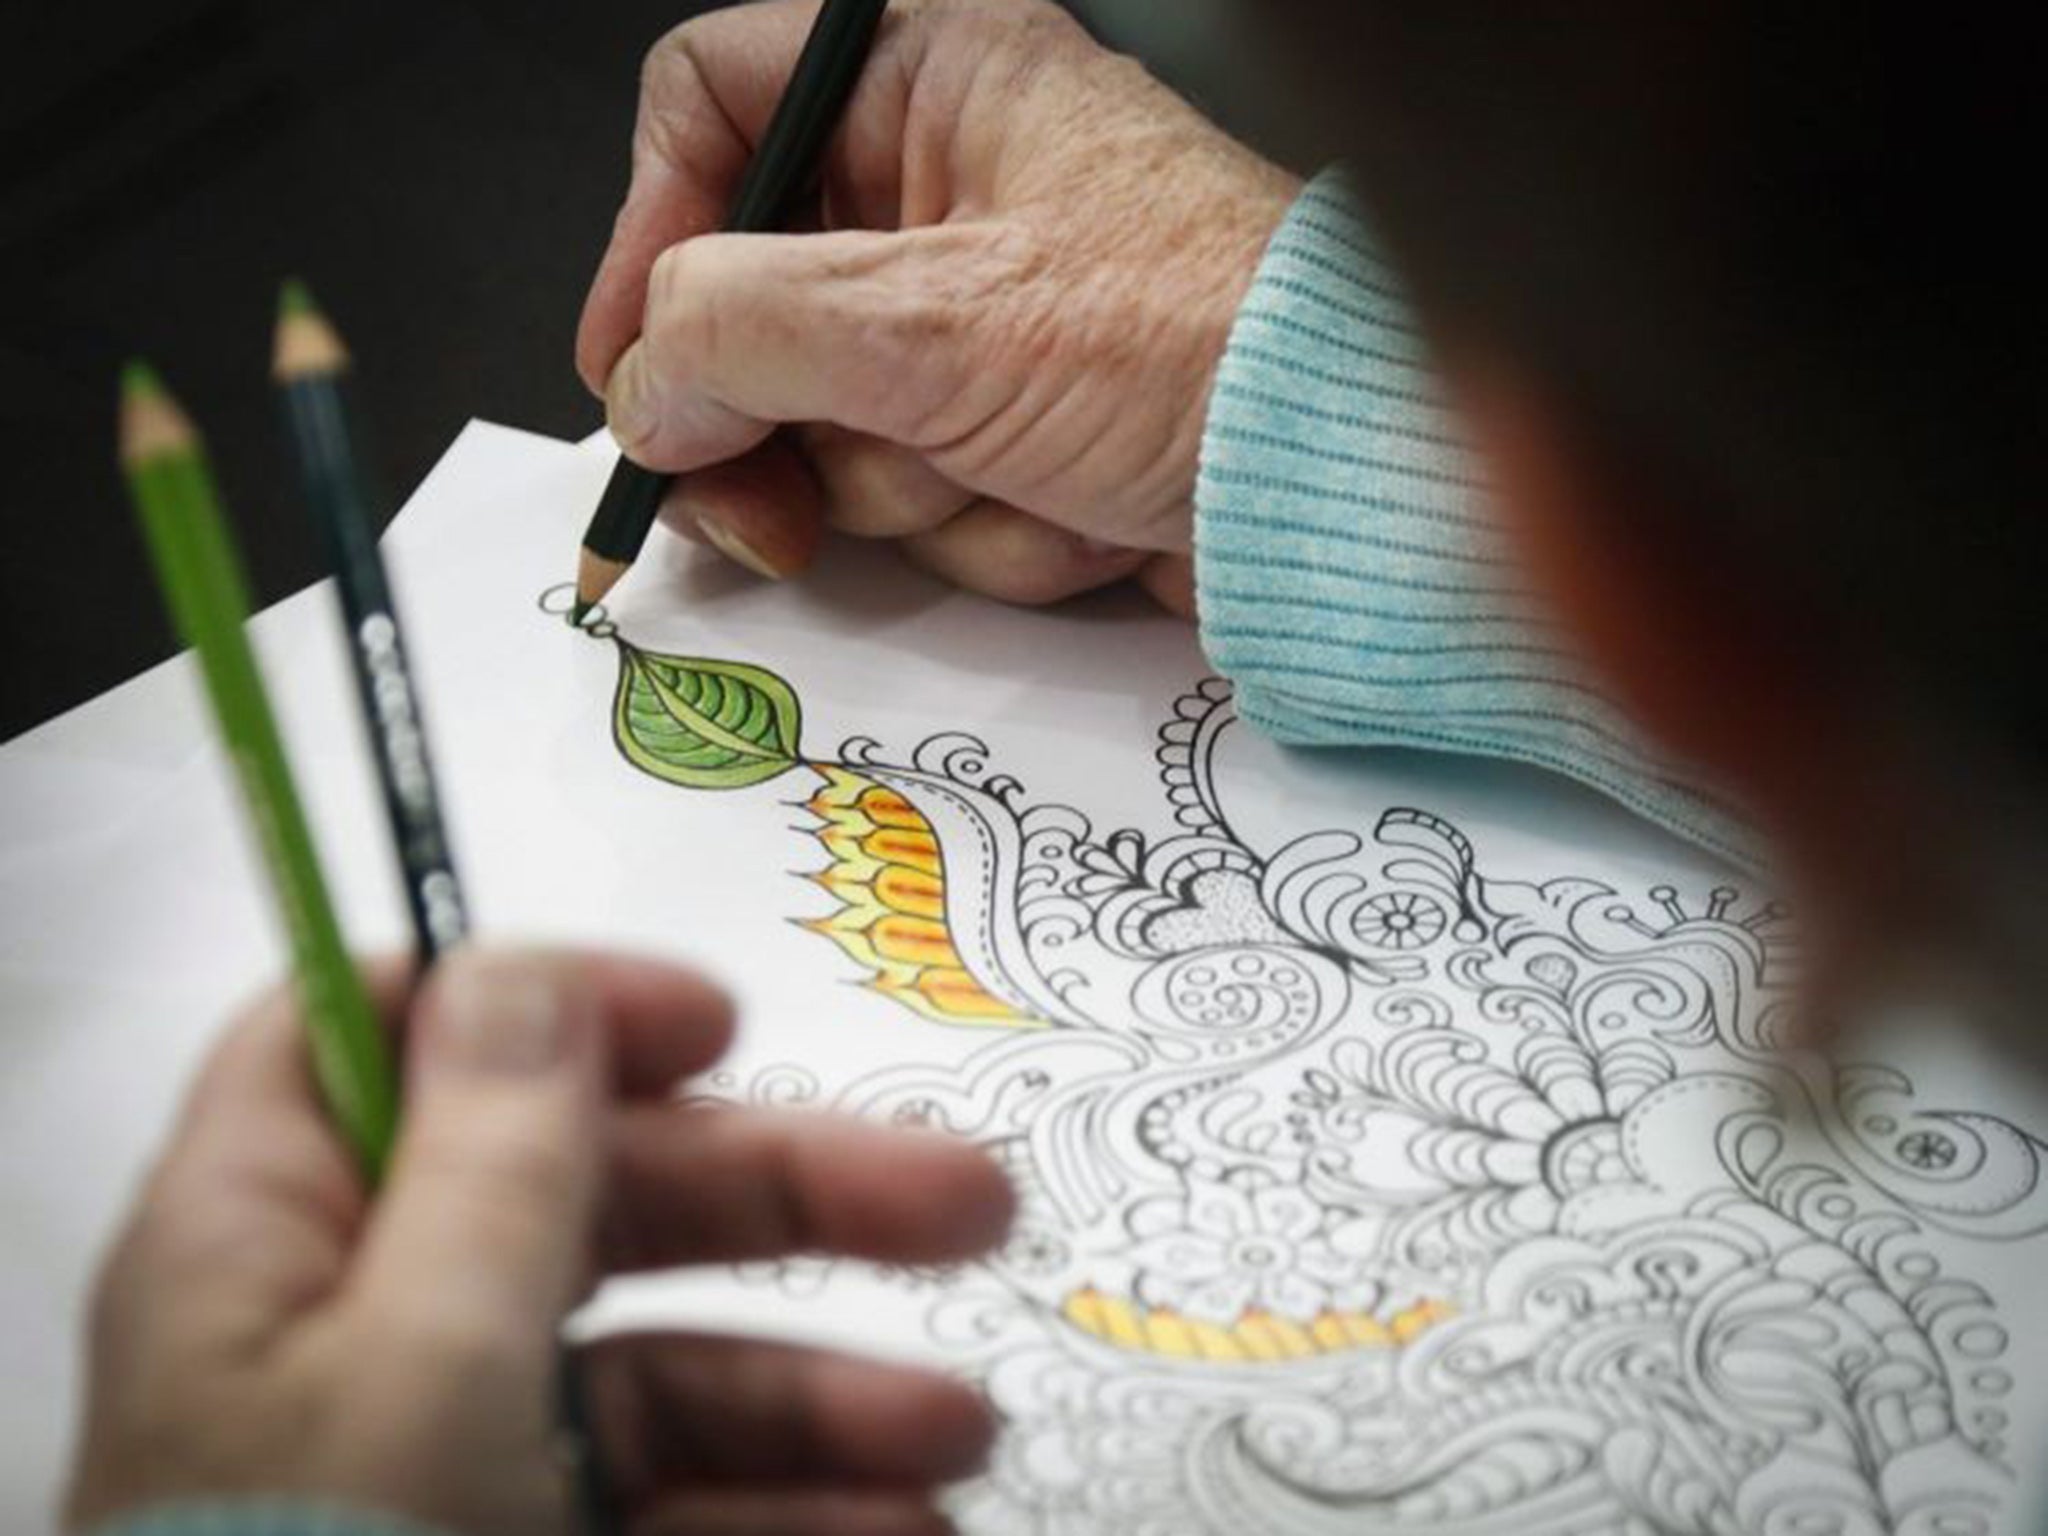 ‘I’ve been in this business for 20 years and I’ve never seen anything like this,’ said one book publisher of the craze for adult colouring